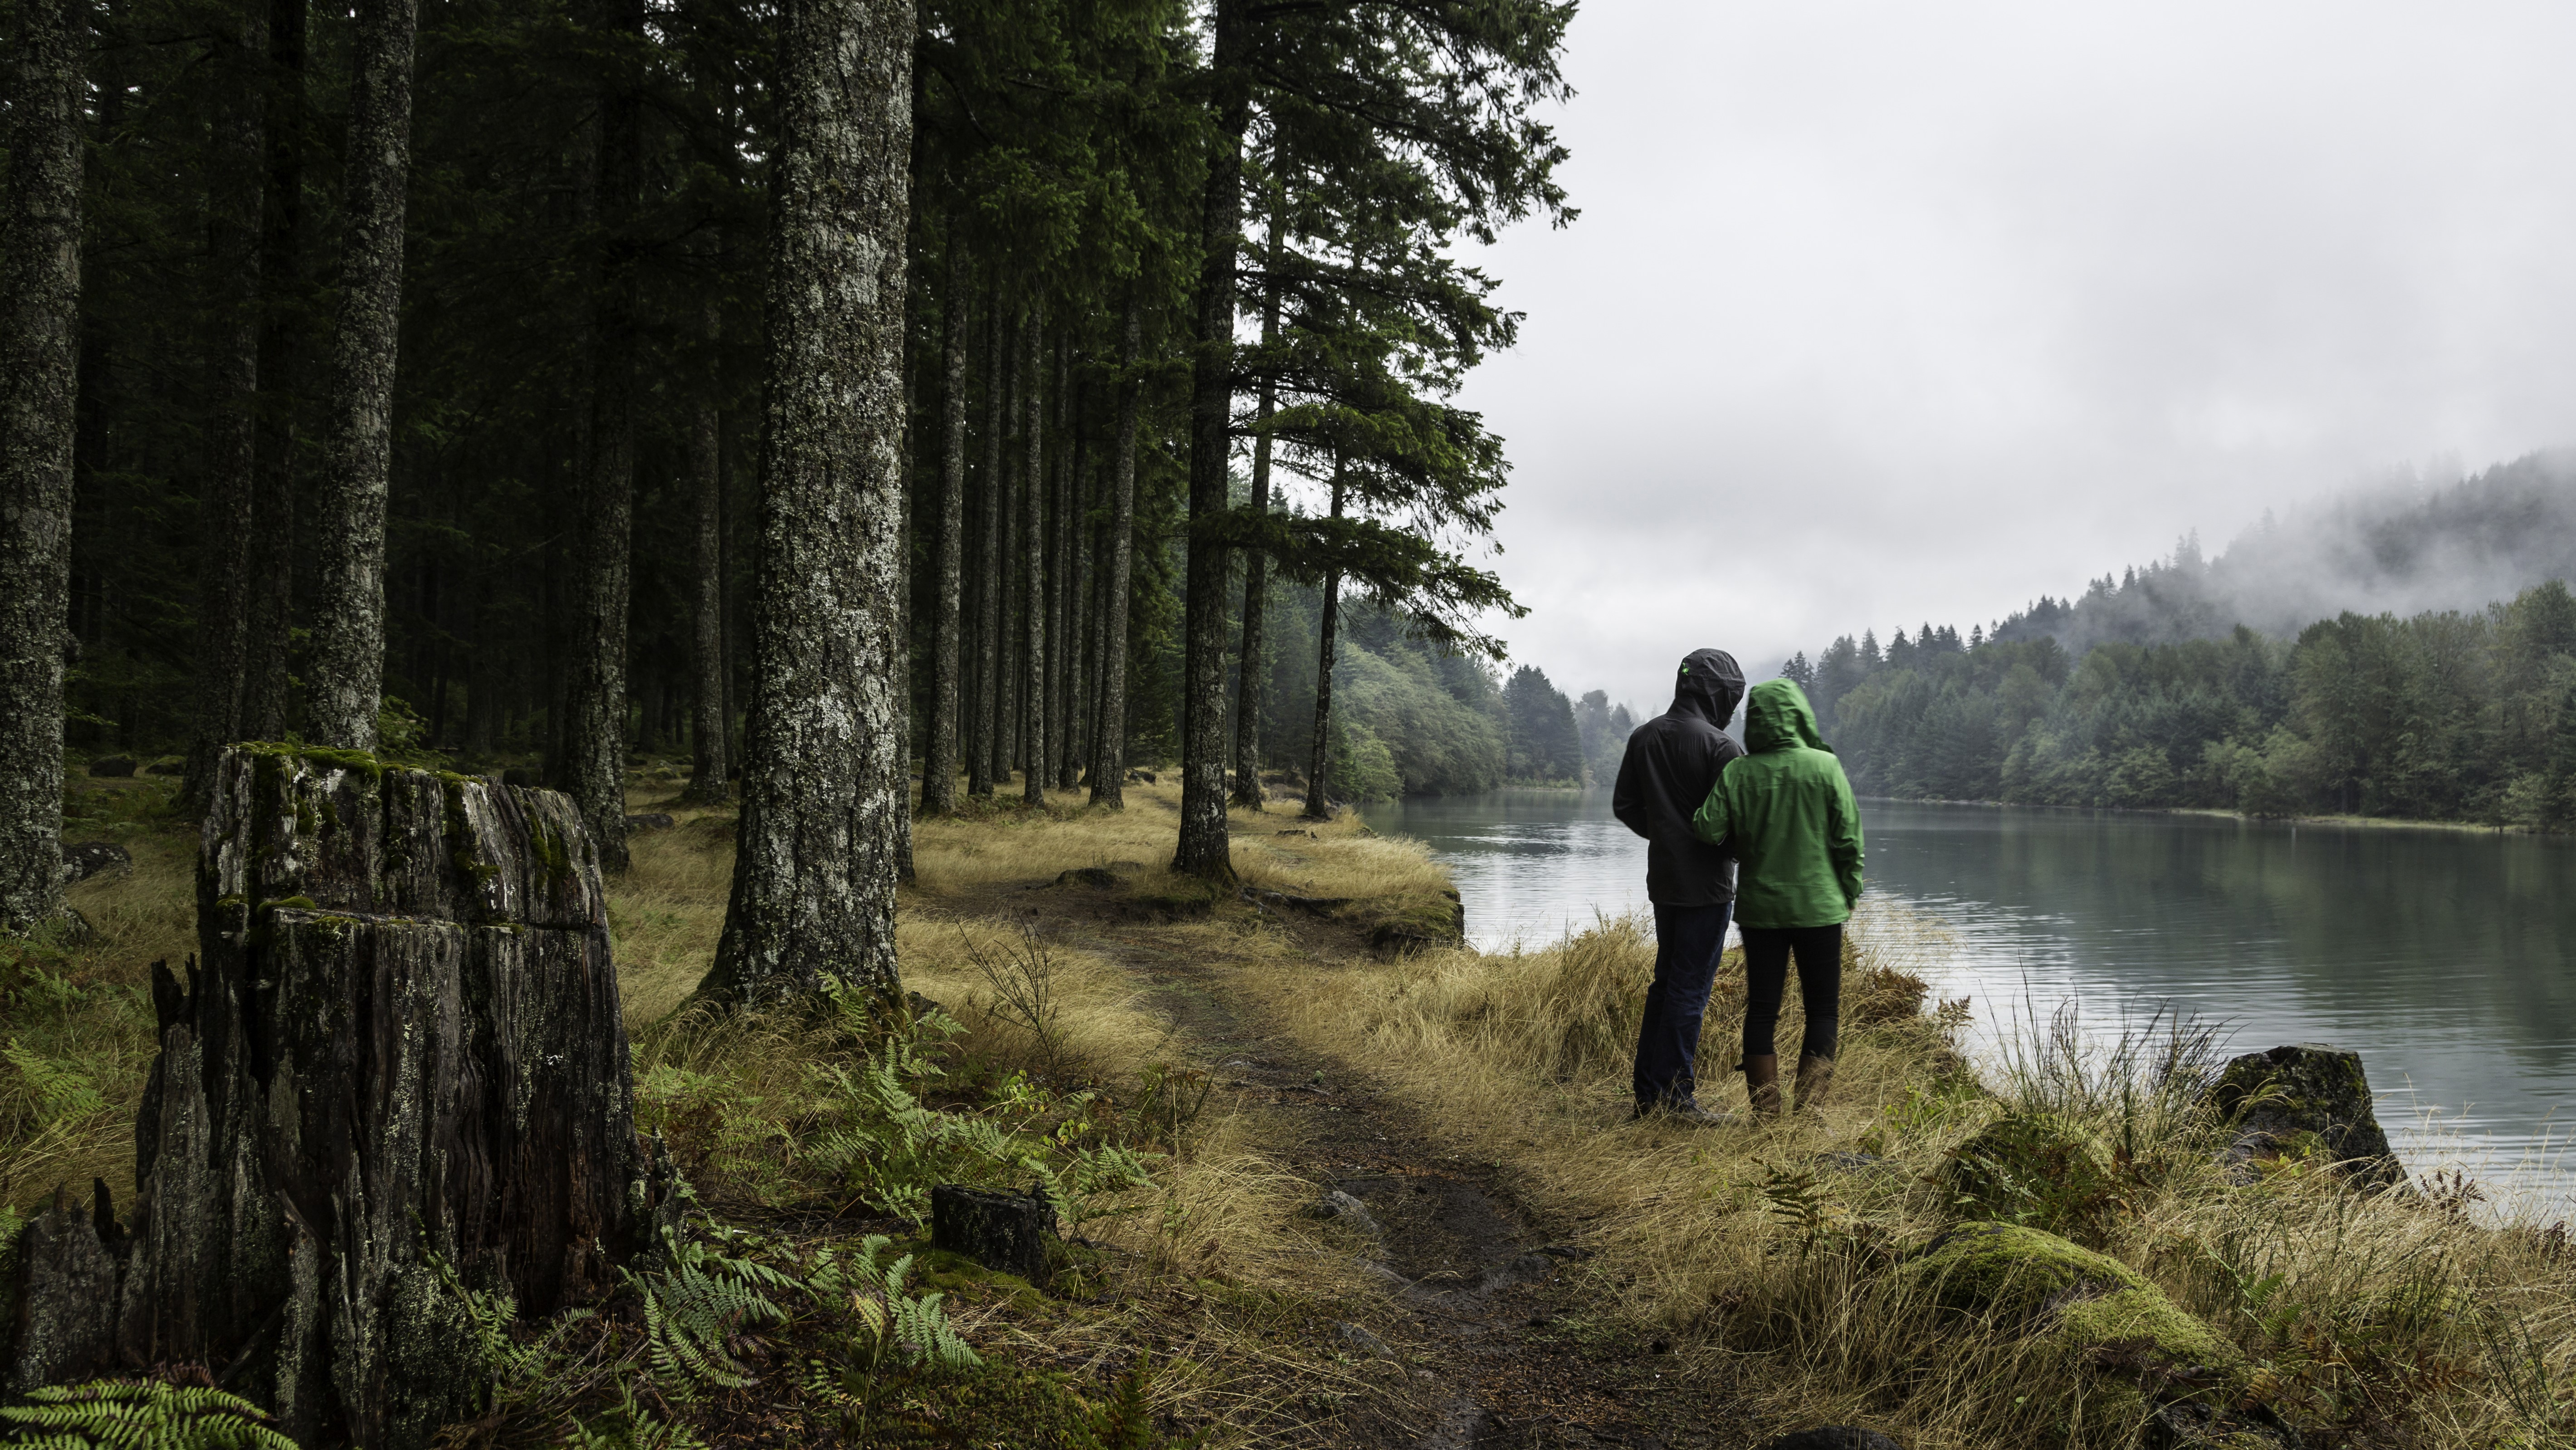 hikers in the woods look out over a lake